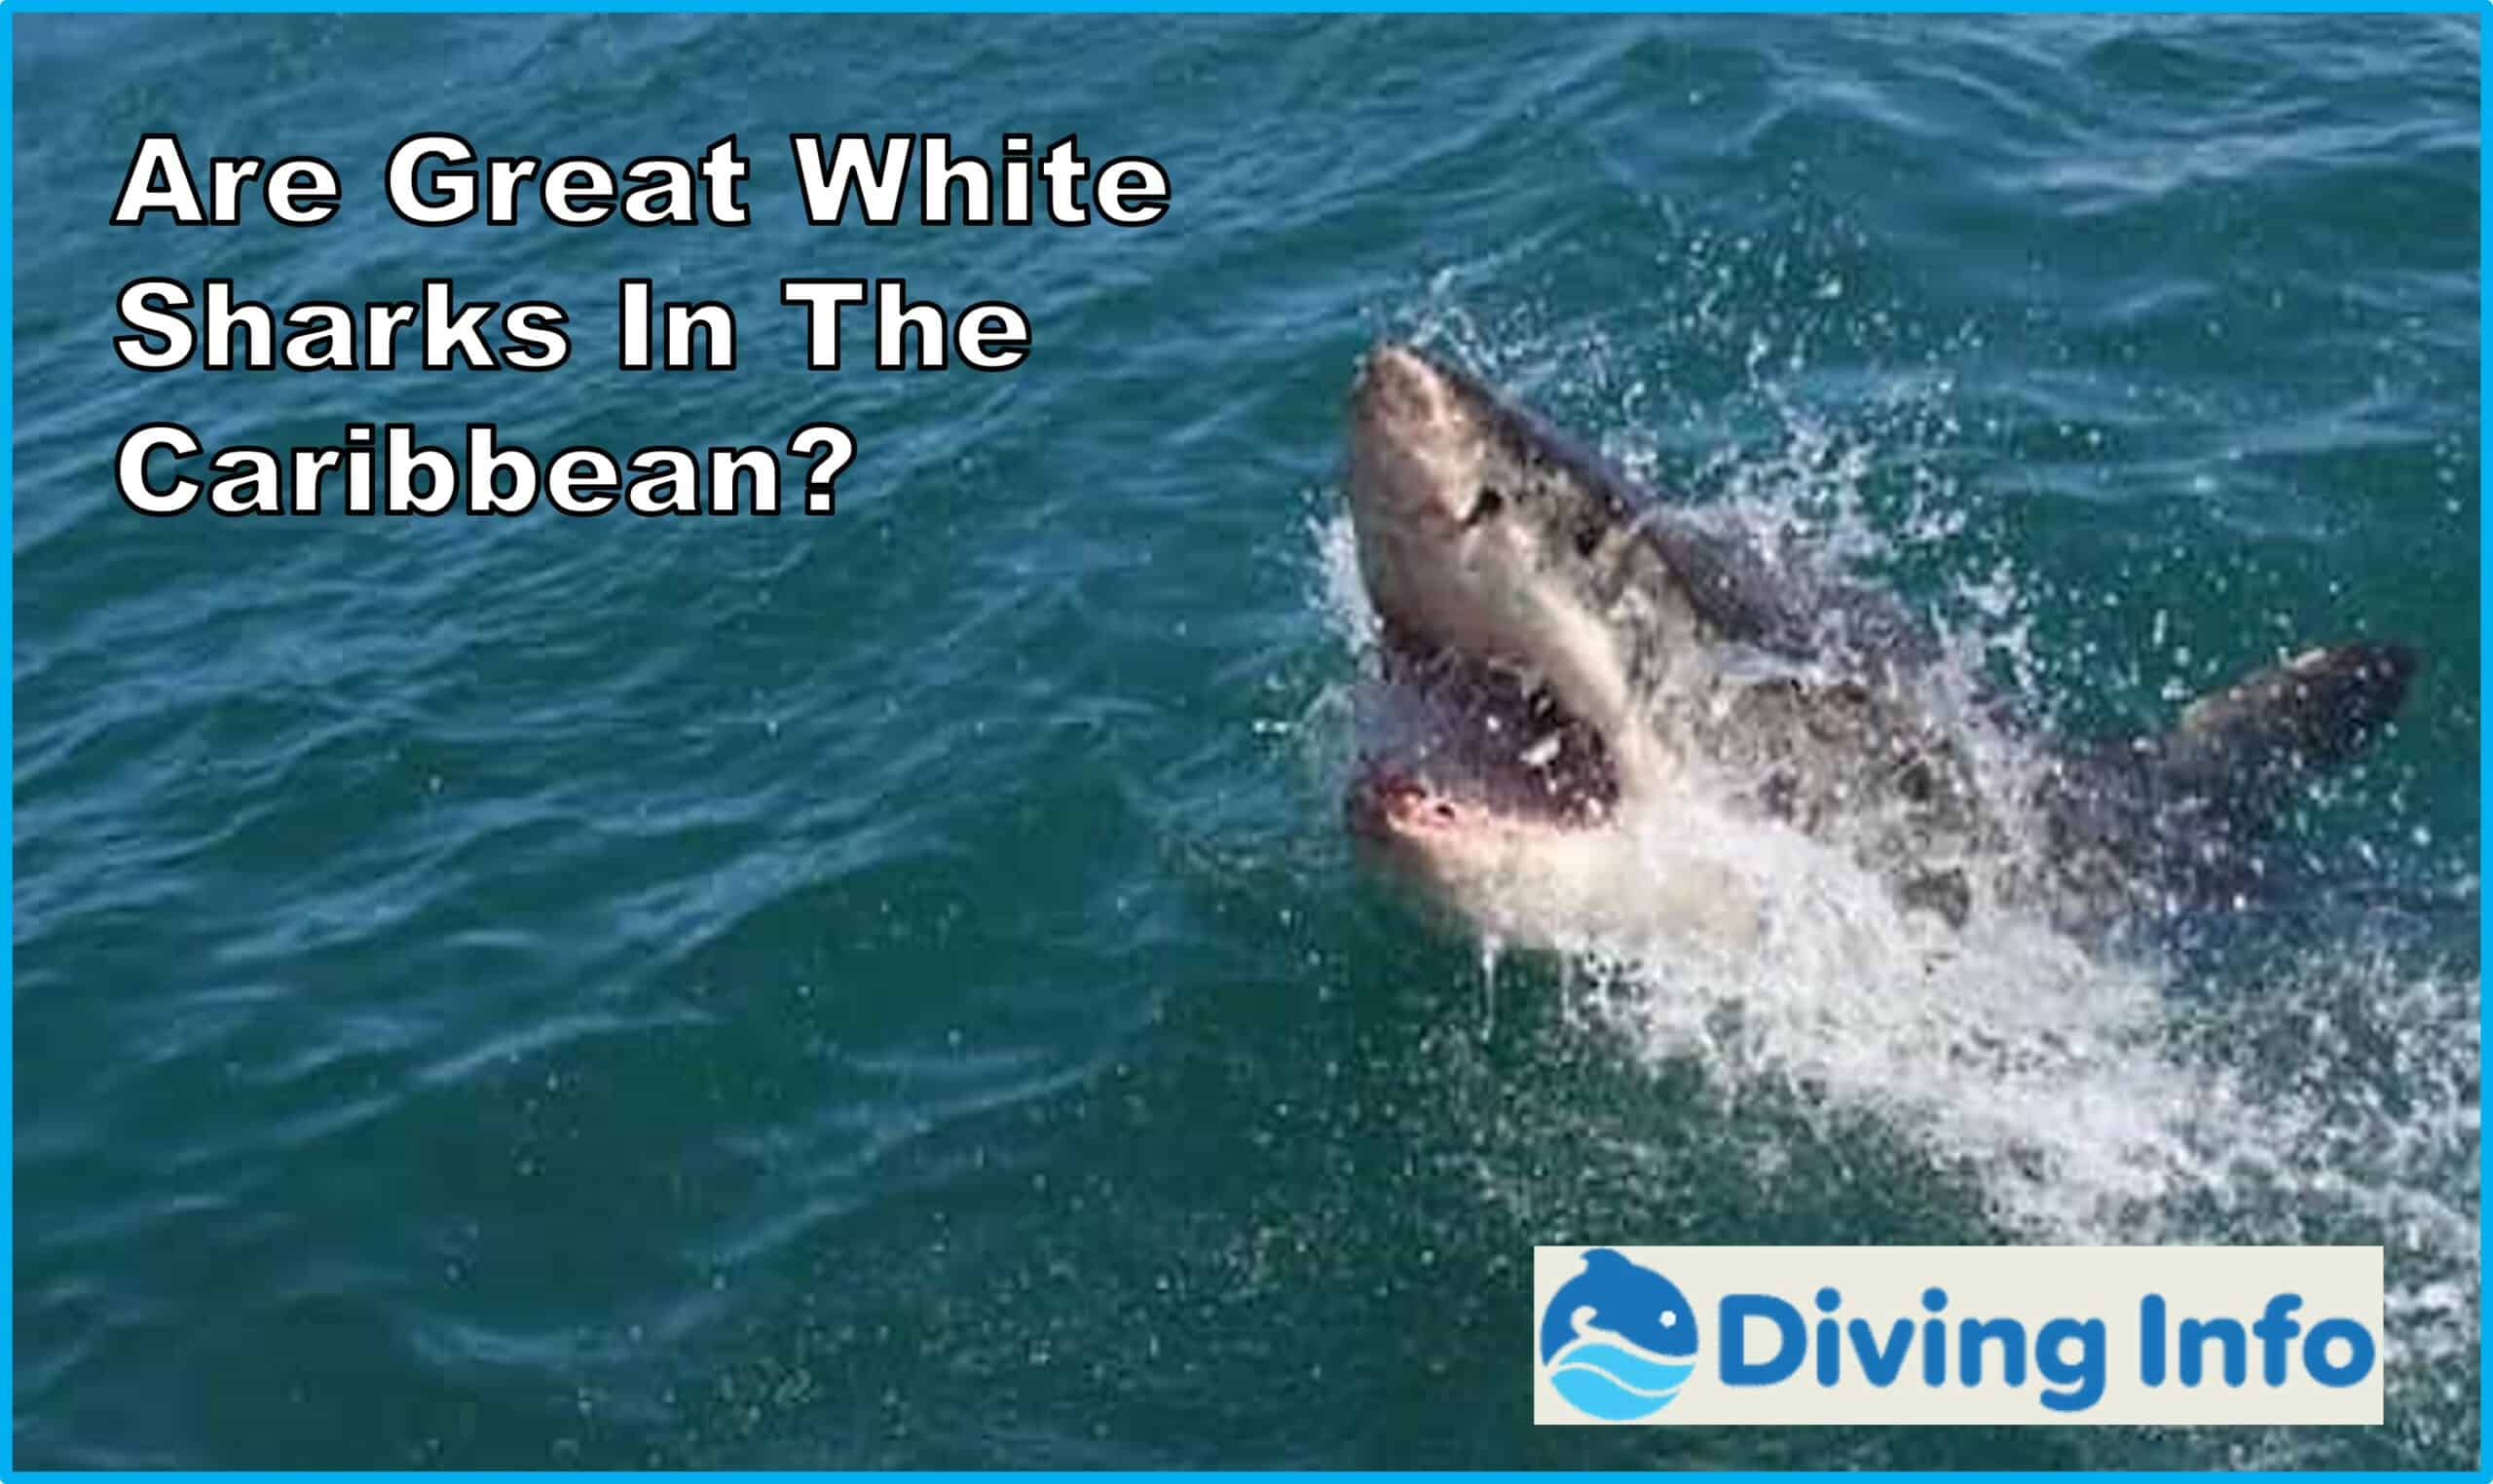 Are Great White Sharks In The Caribbean